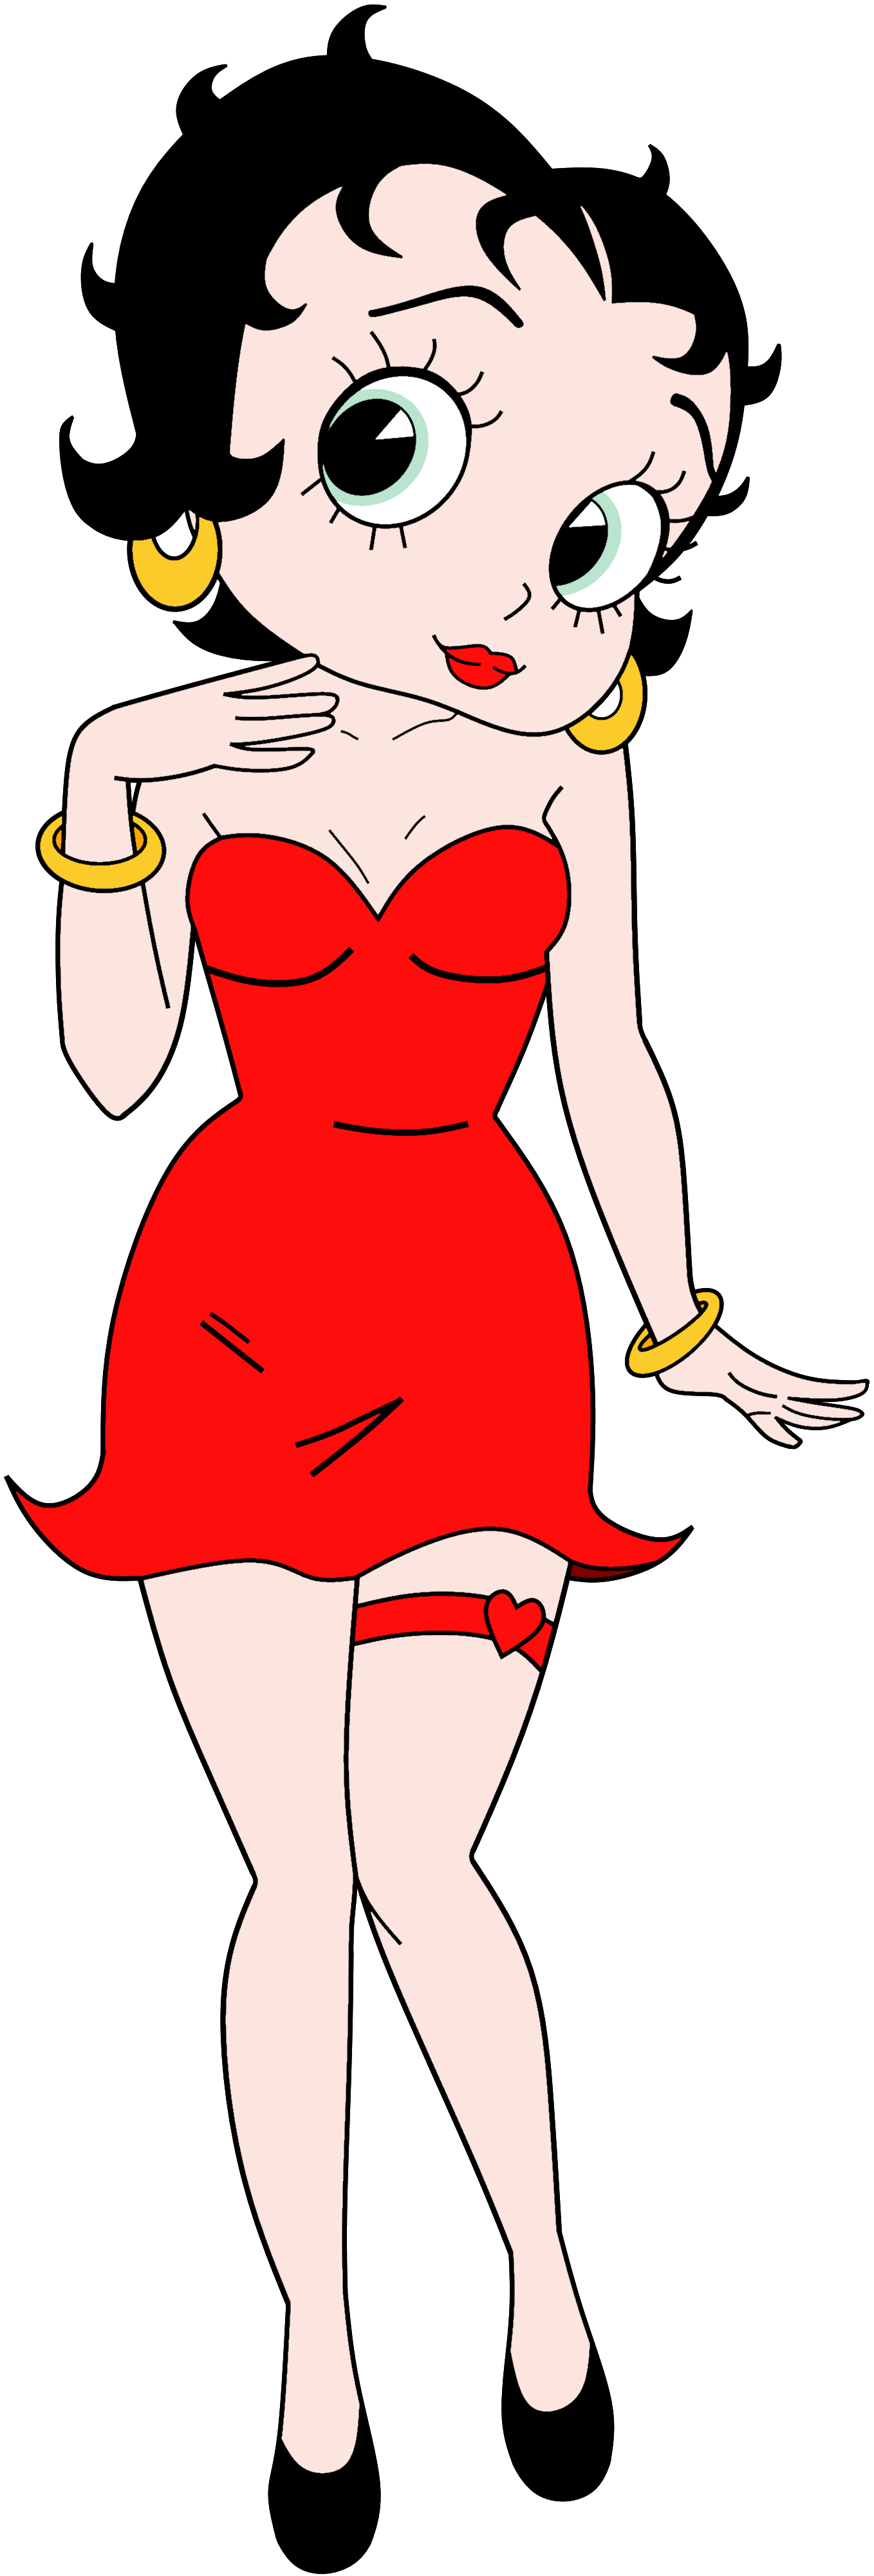 Image Betty Boop Anime Renderpng Heroes Wiki Fandom Powered By Wikia